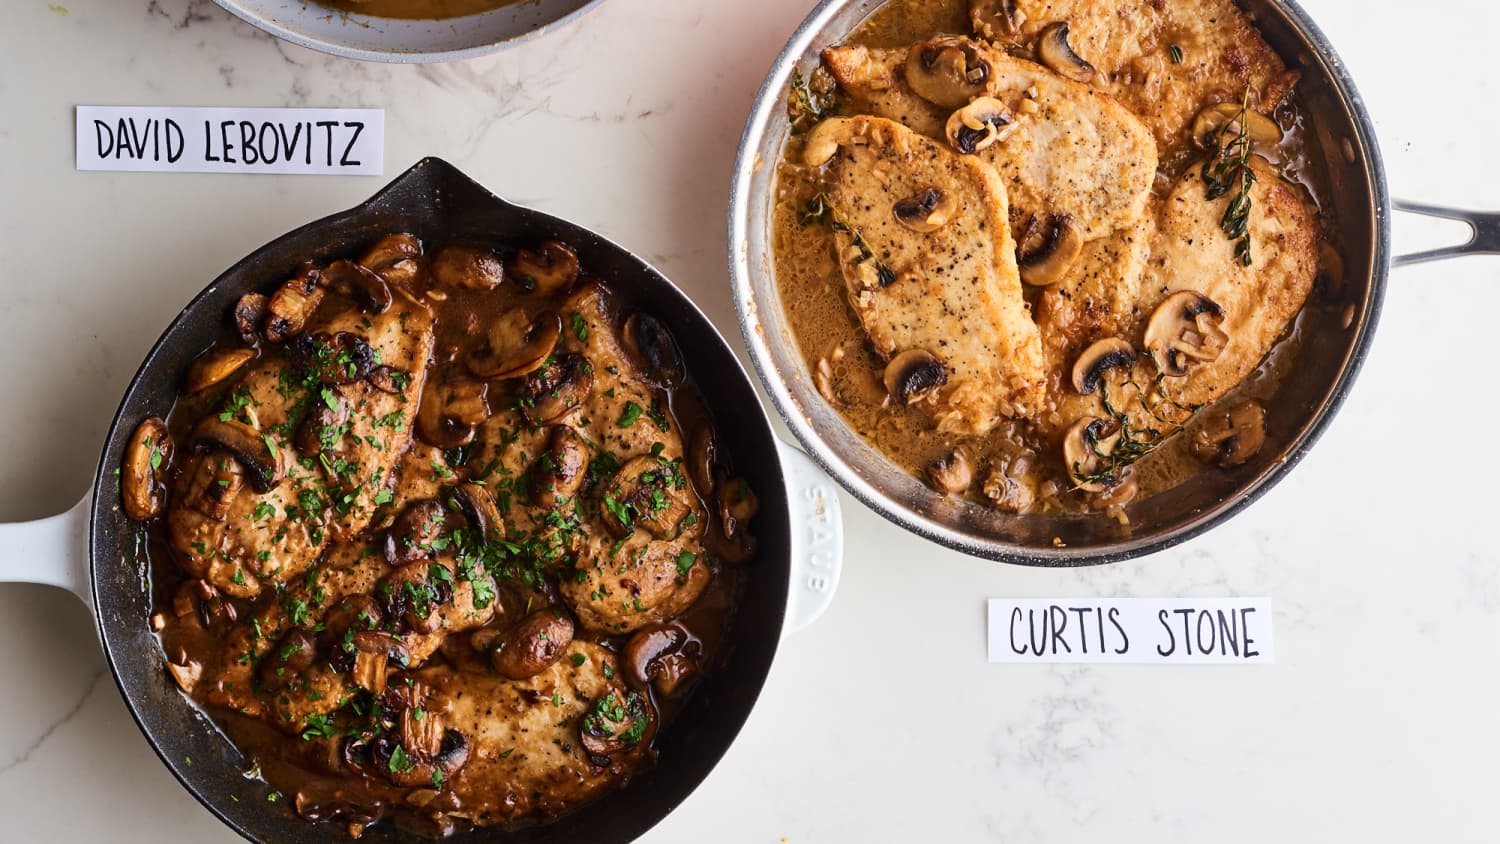 I Tried Curtis Stone's Chicken Marsala - Here's My Honest Review